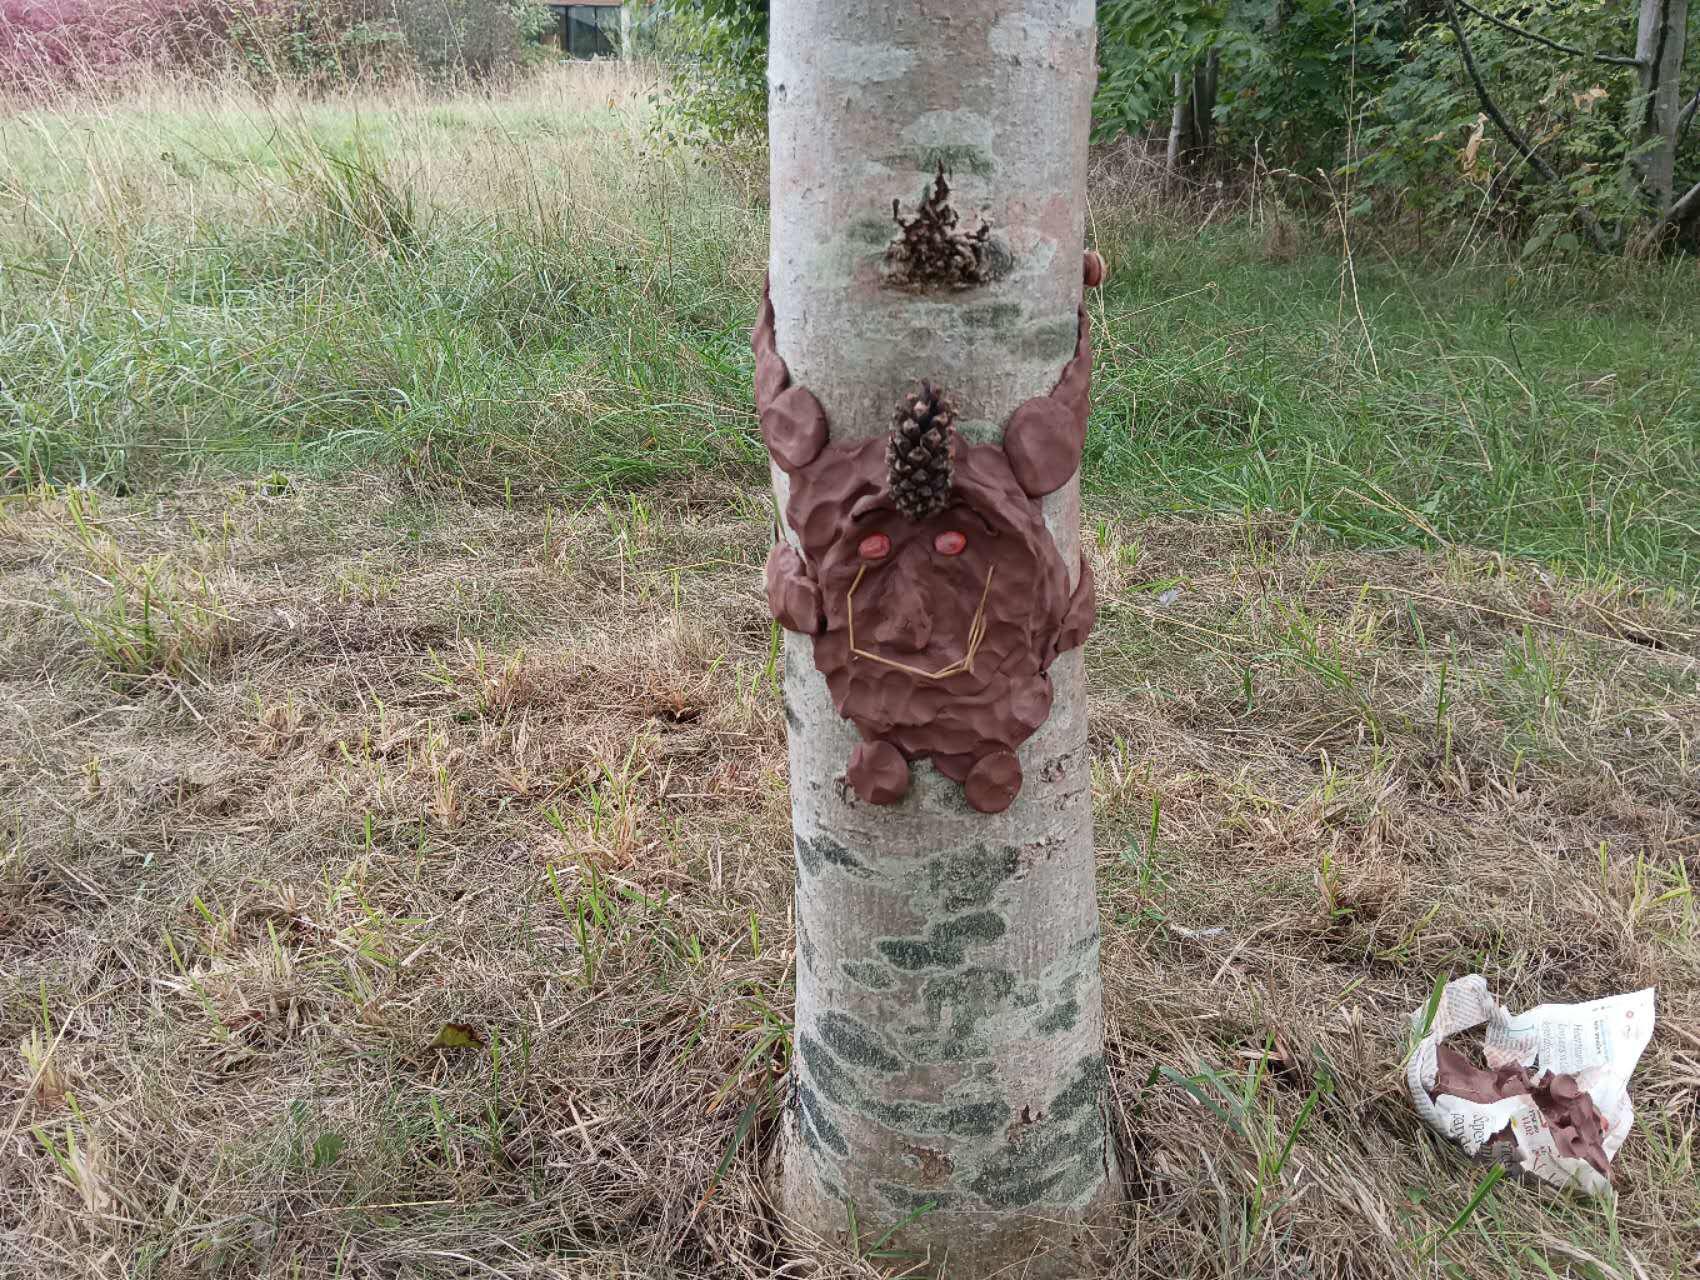 Photograph of a clay face sculpture on a tree